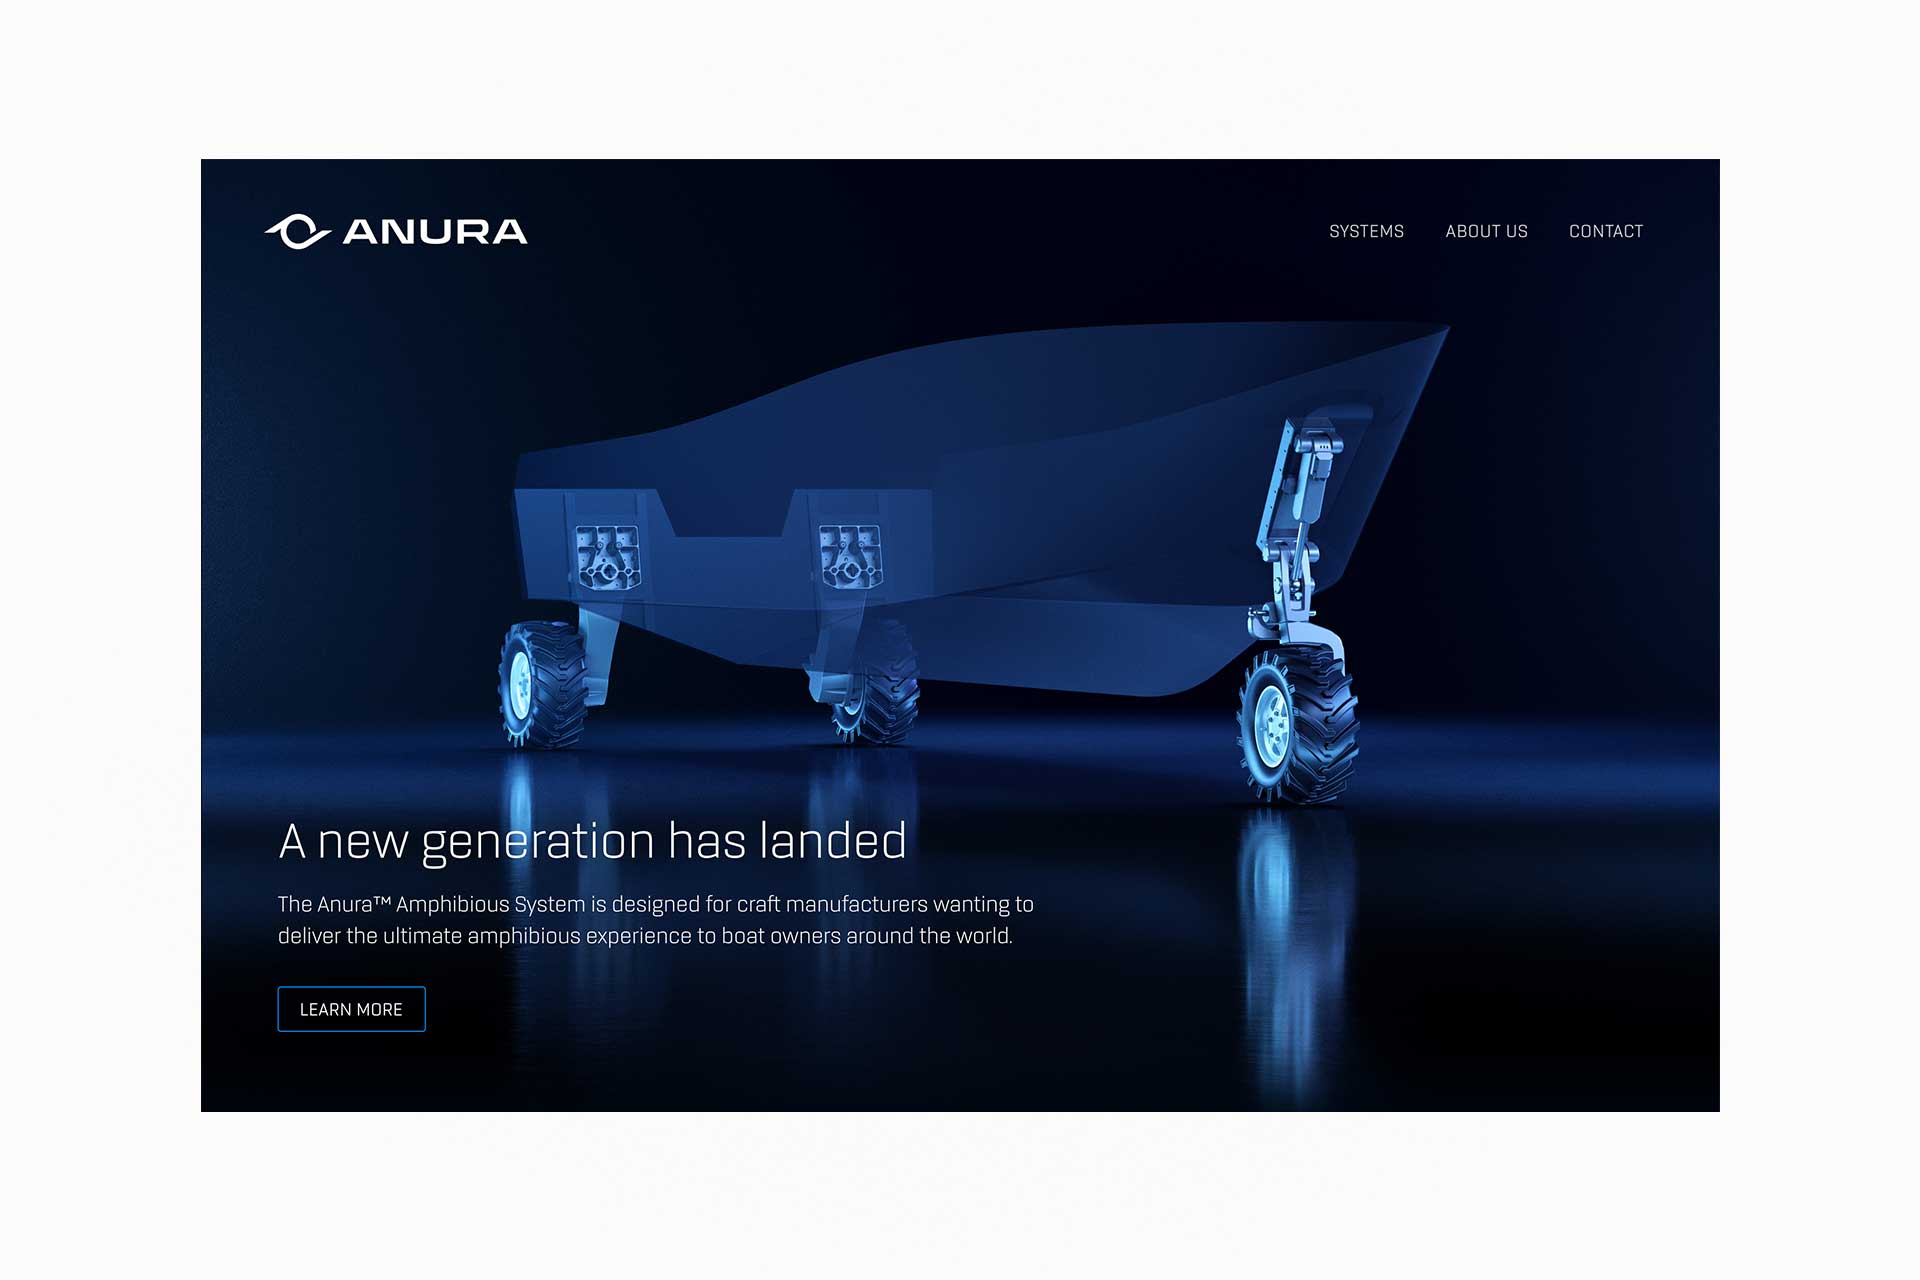 Website homepage with Amphibious System